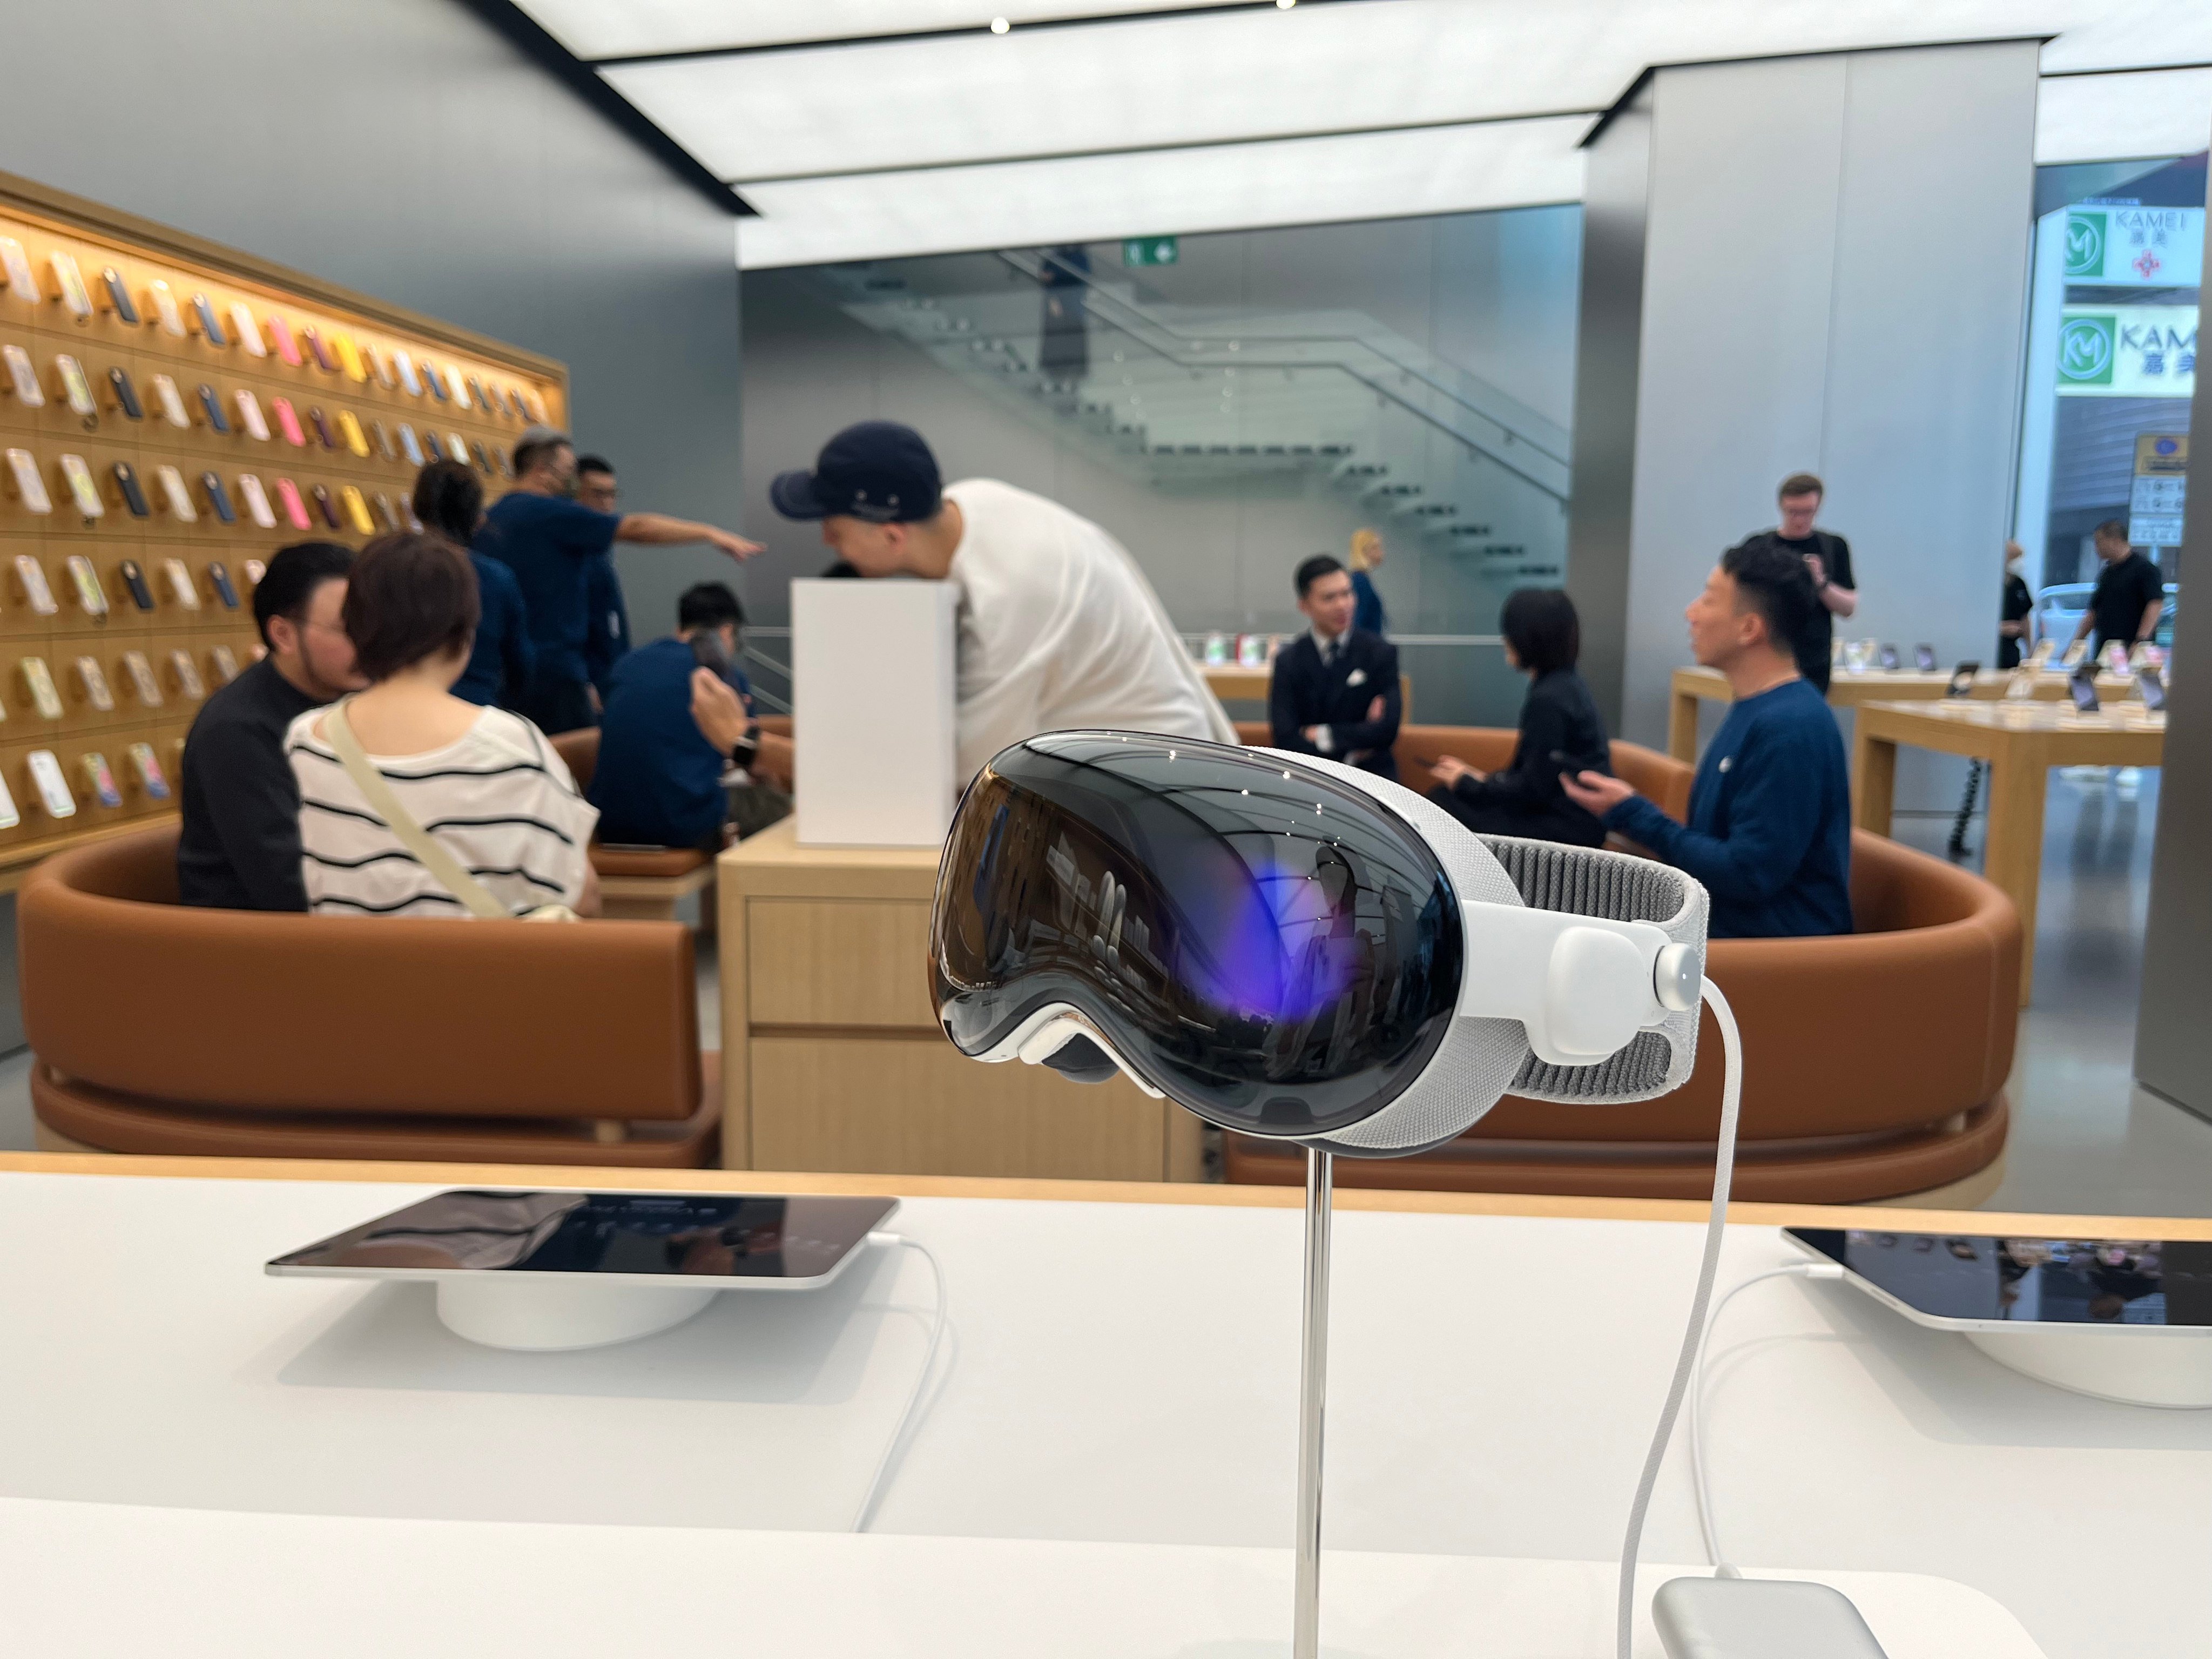 Apple’s Vision Pro mixed-reality headset officially launches on Friday in Hong Kong. Photo: Xinmei Shen